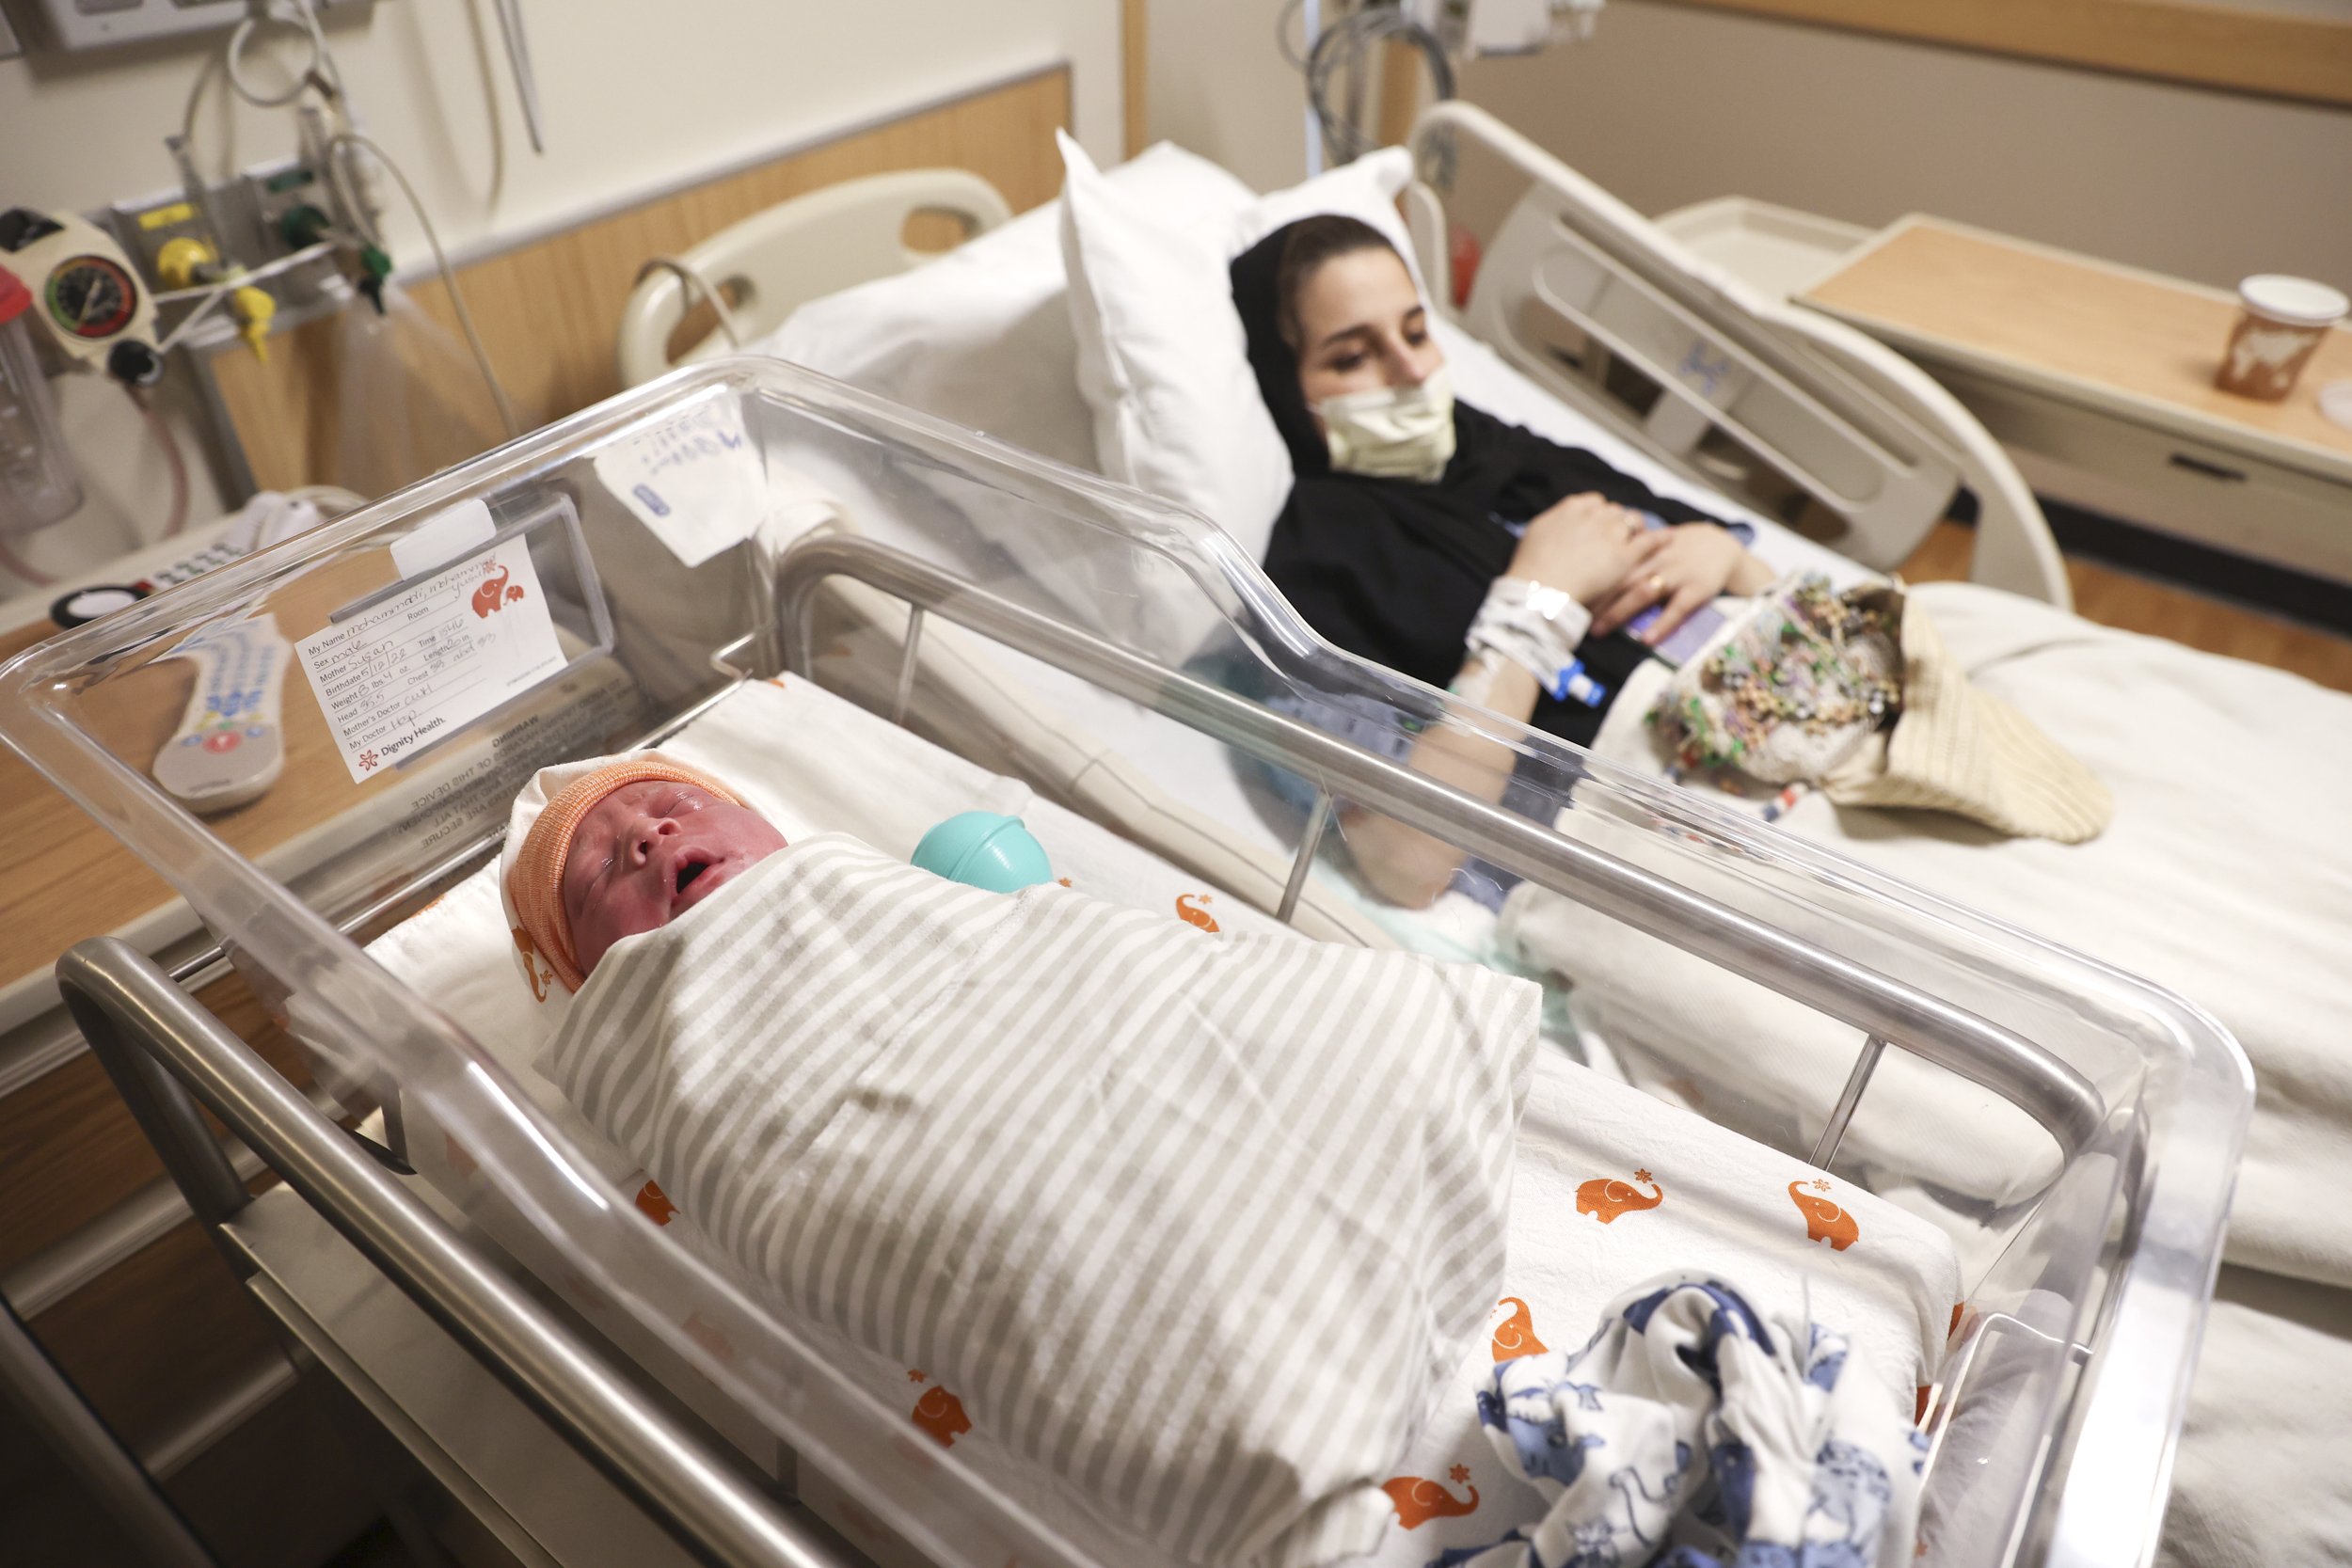  Newborn Yusuf Mohammadi and his mother Susan Mohammadi rest in bed at Mercy San Juan Hospital on Thursday, May 12, 2022. After spending over an hour at the Sutter Hospital, the Mohammadi family was informed that there were no female doctors availabl